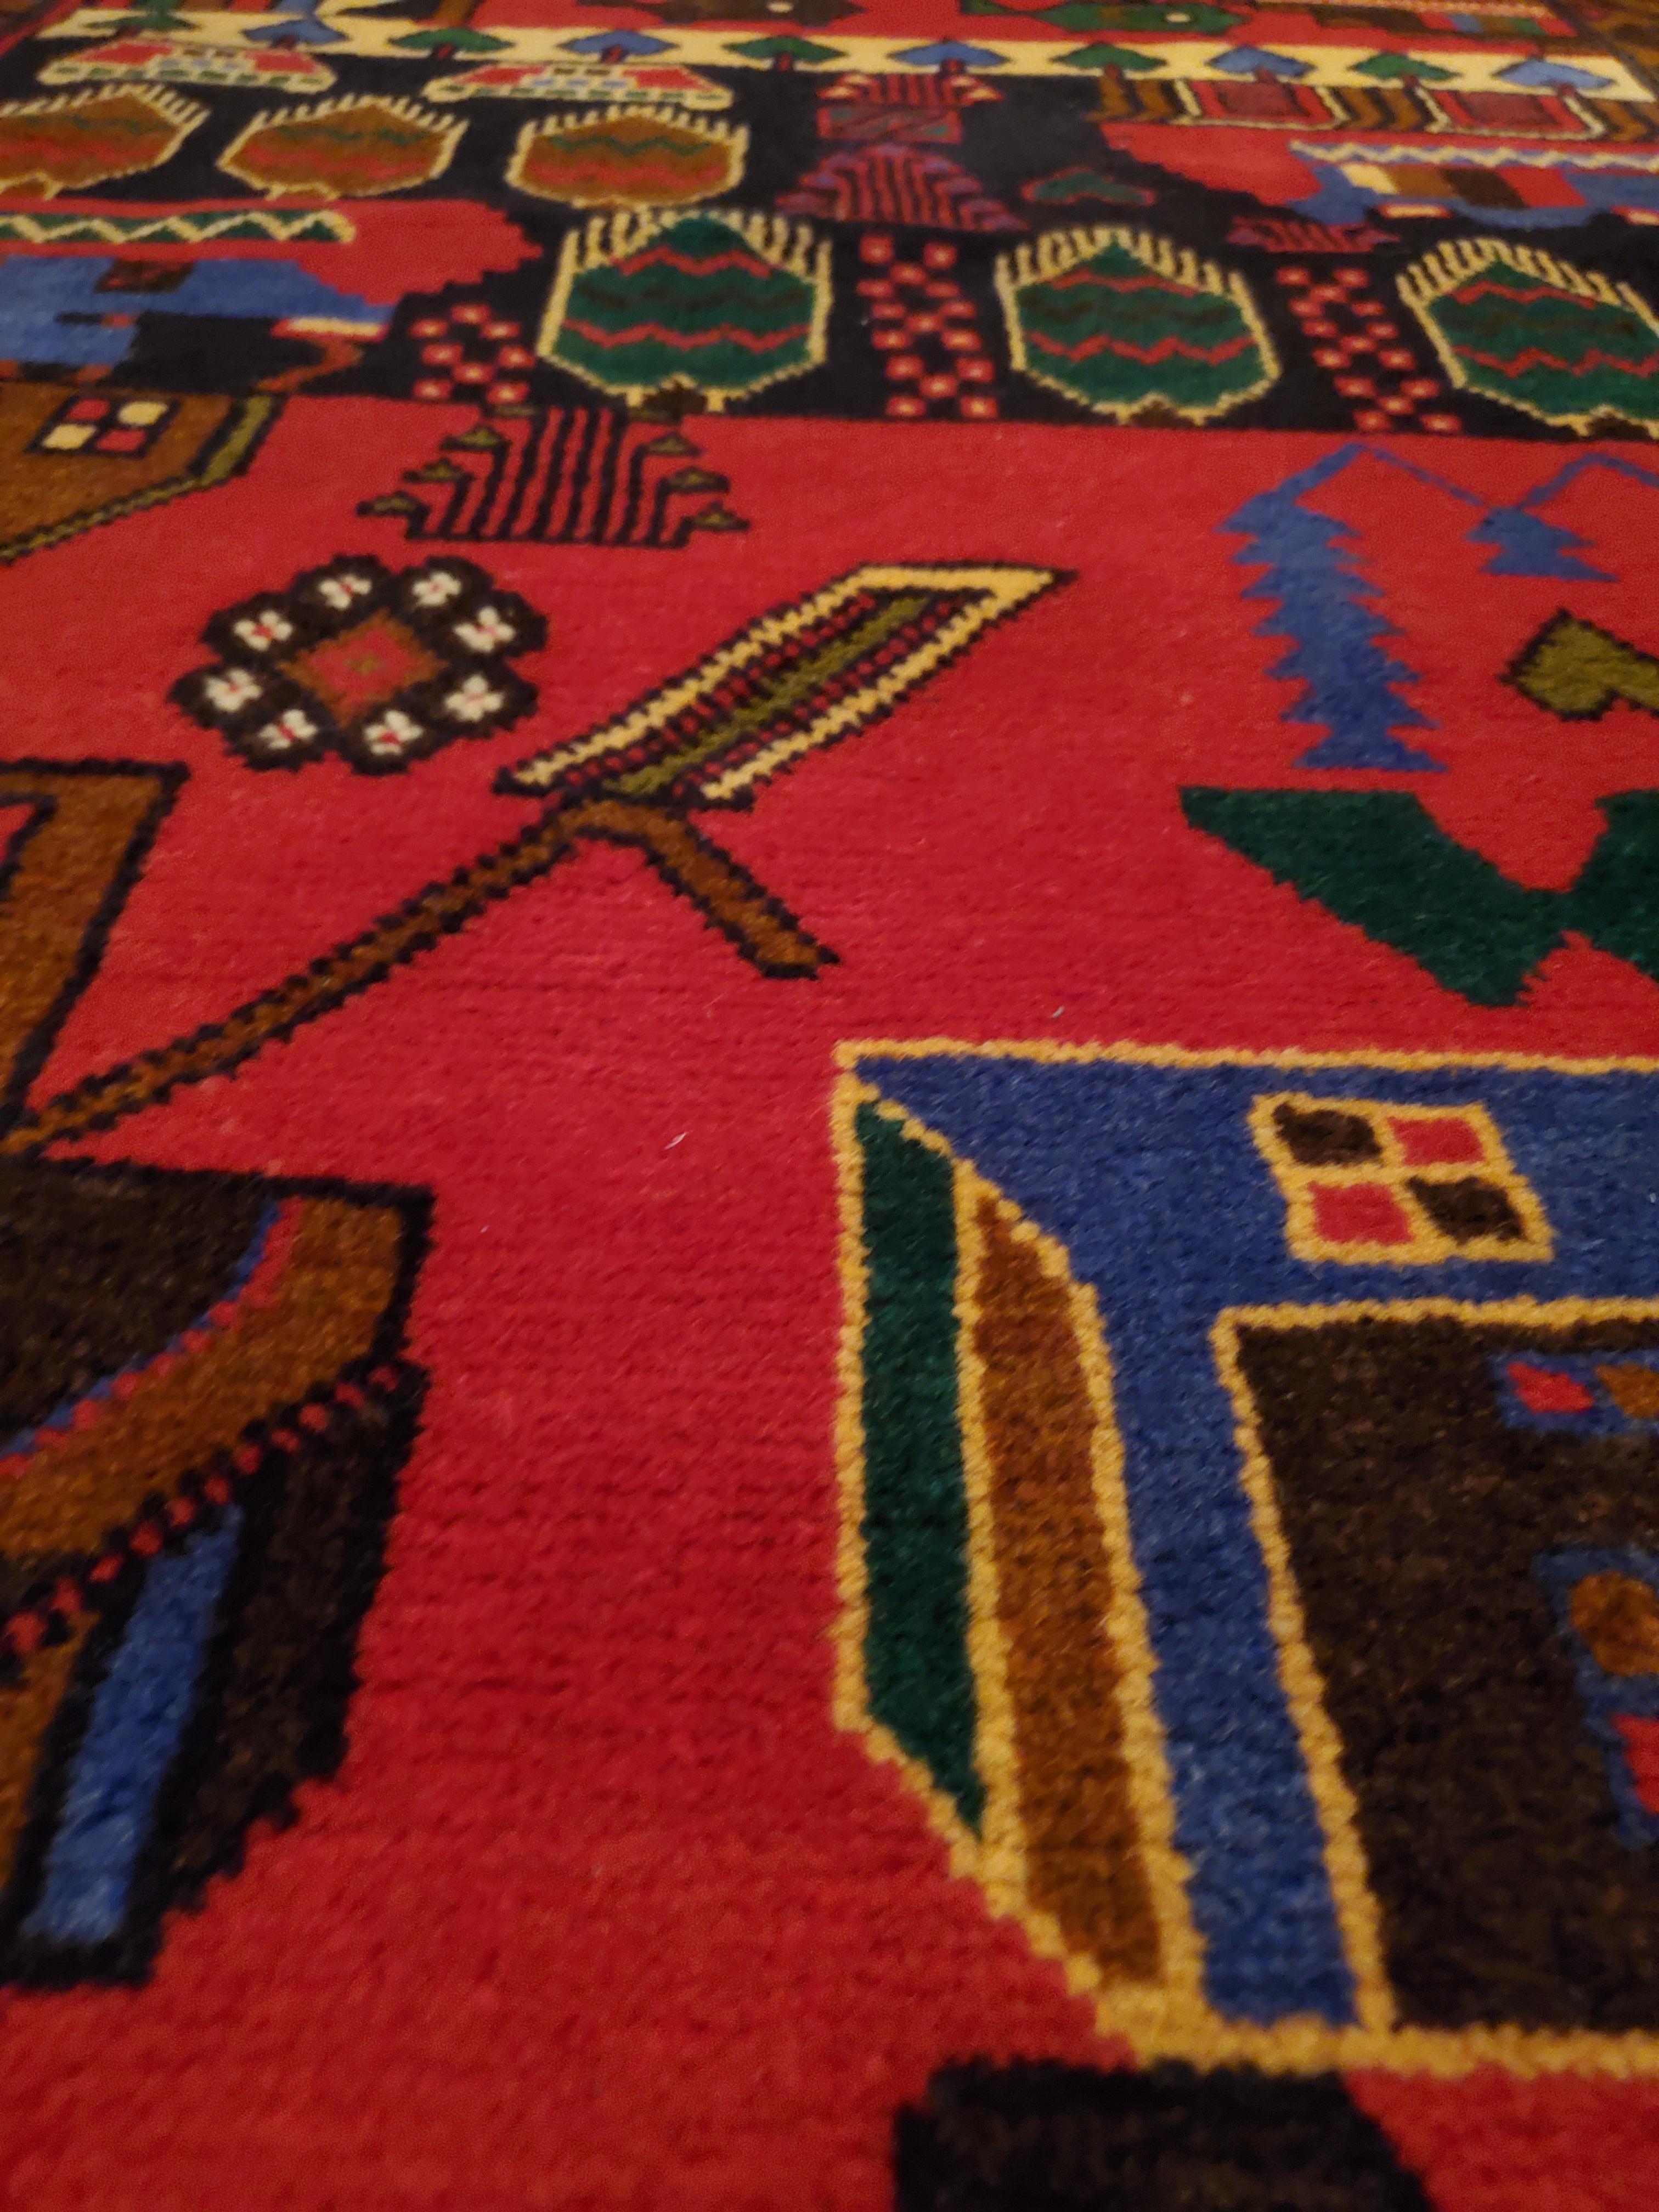 Medium to Large Size Afghan Area Carpet / Rug, Colorful / 372 In New Condition For Sale In Orlando, FL